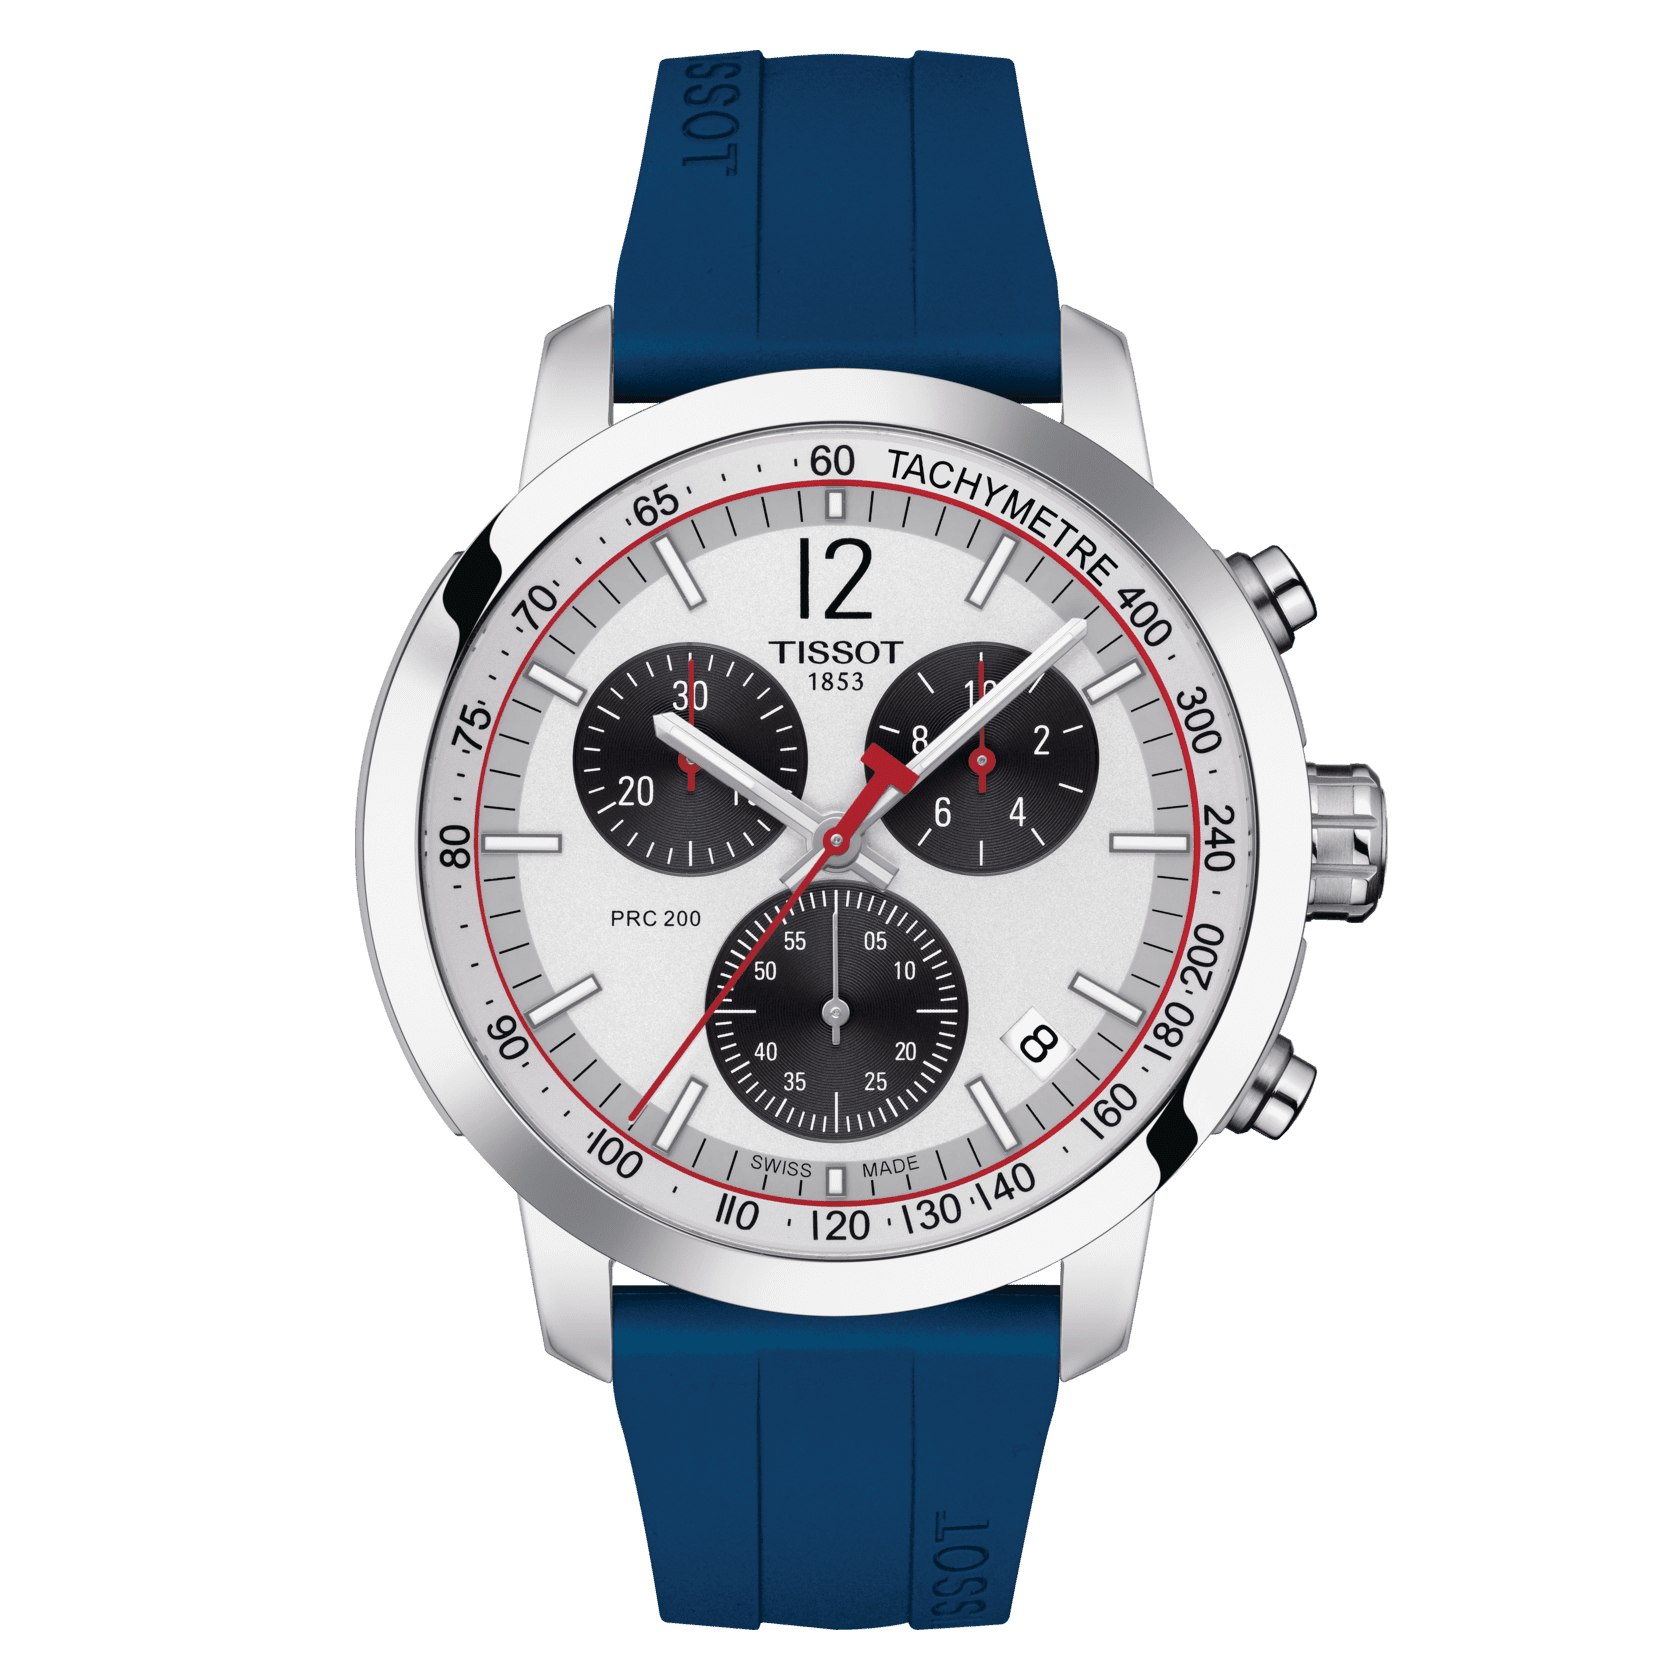 Tissot PRC 200 IIHF 2020 Special Edition